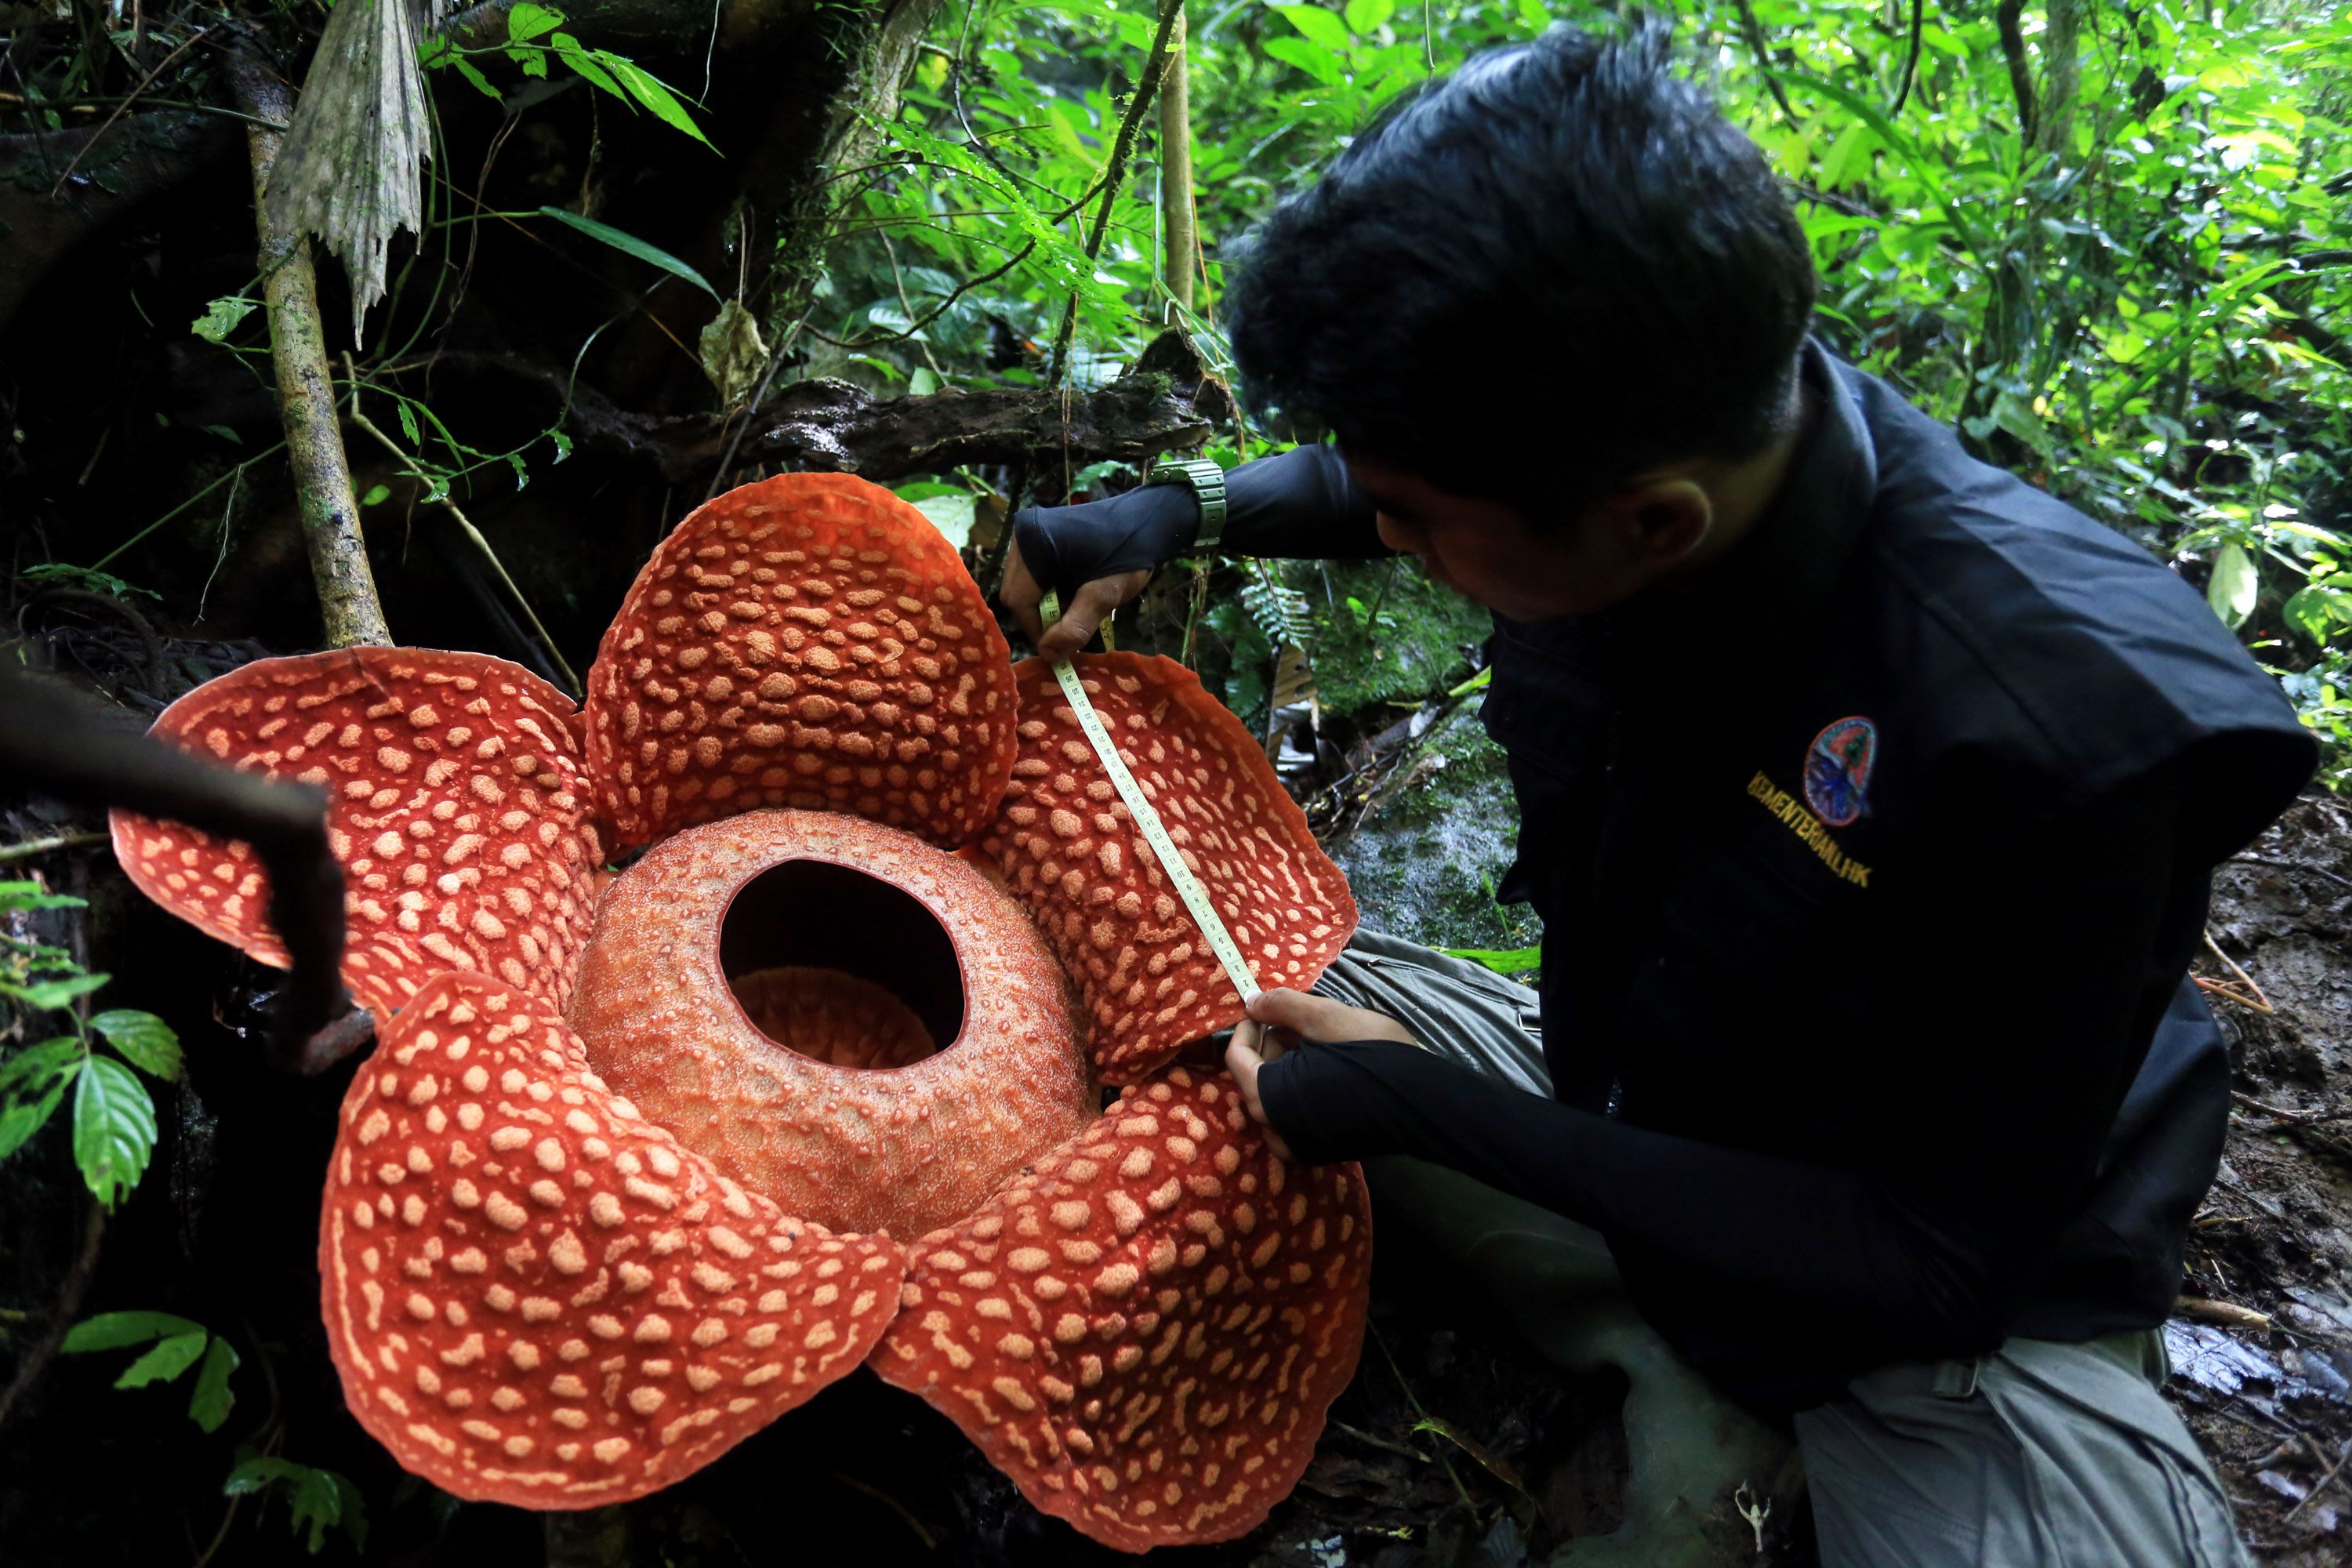 The World's Largest Flower Absolutely Reeks